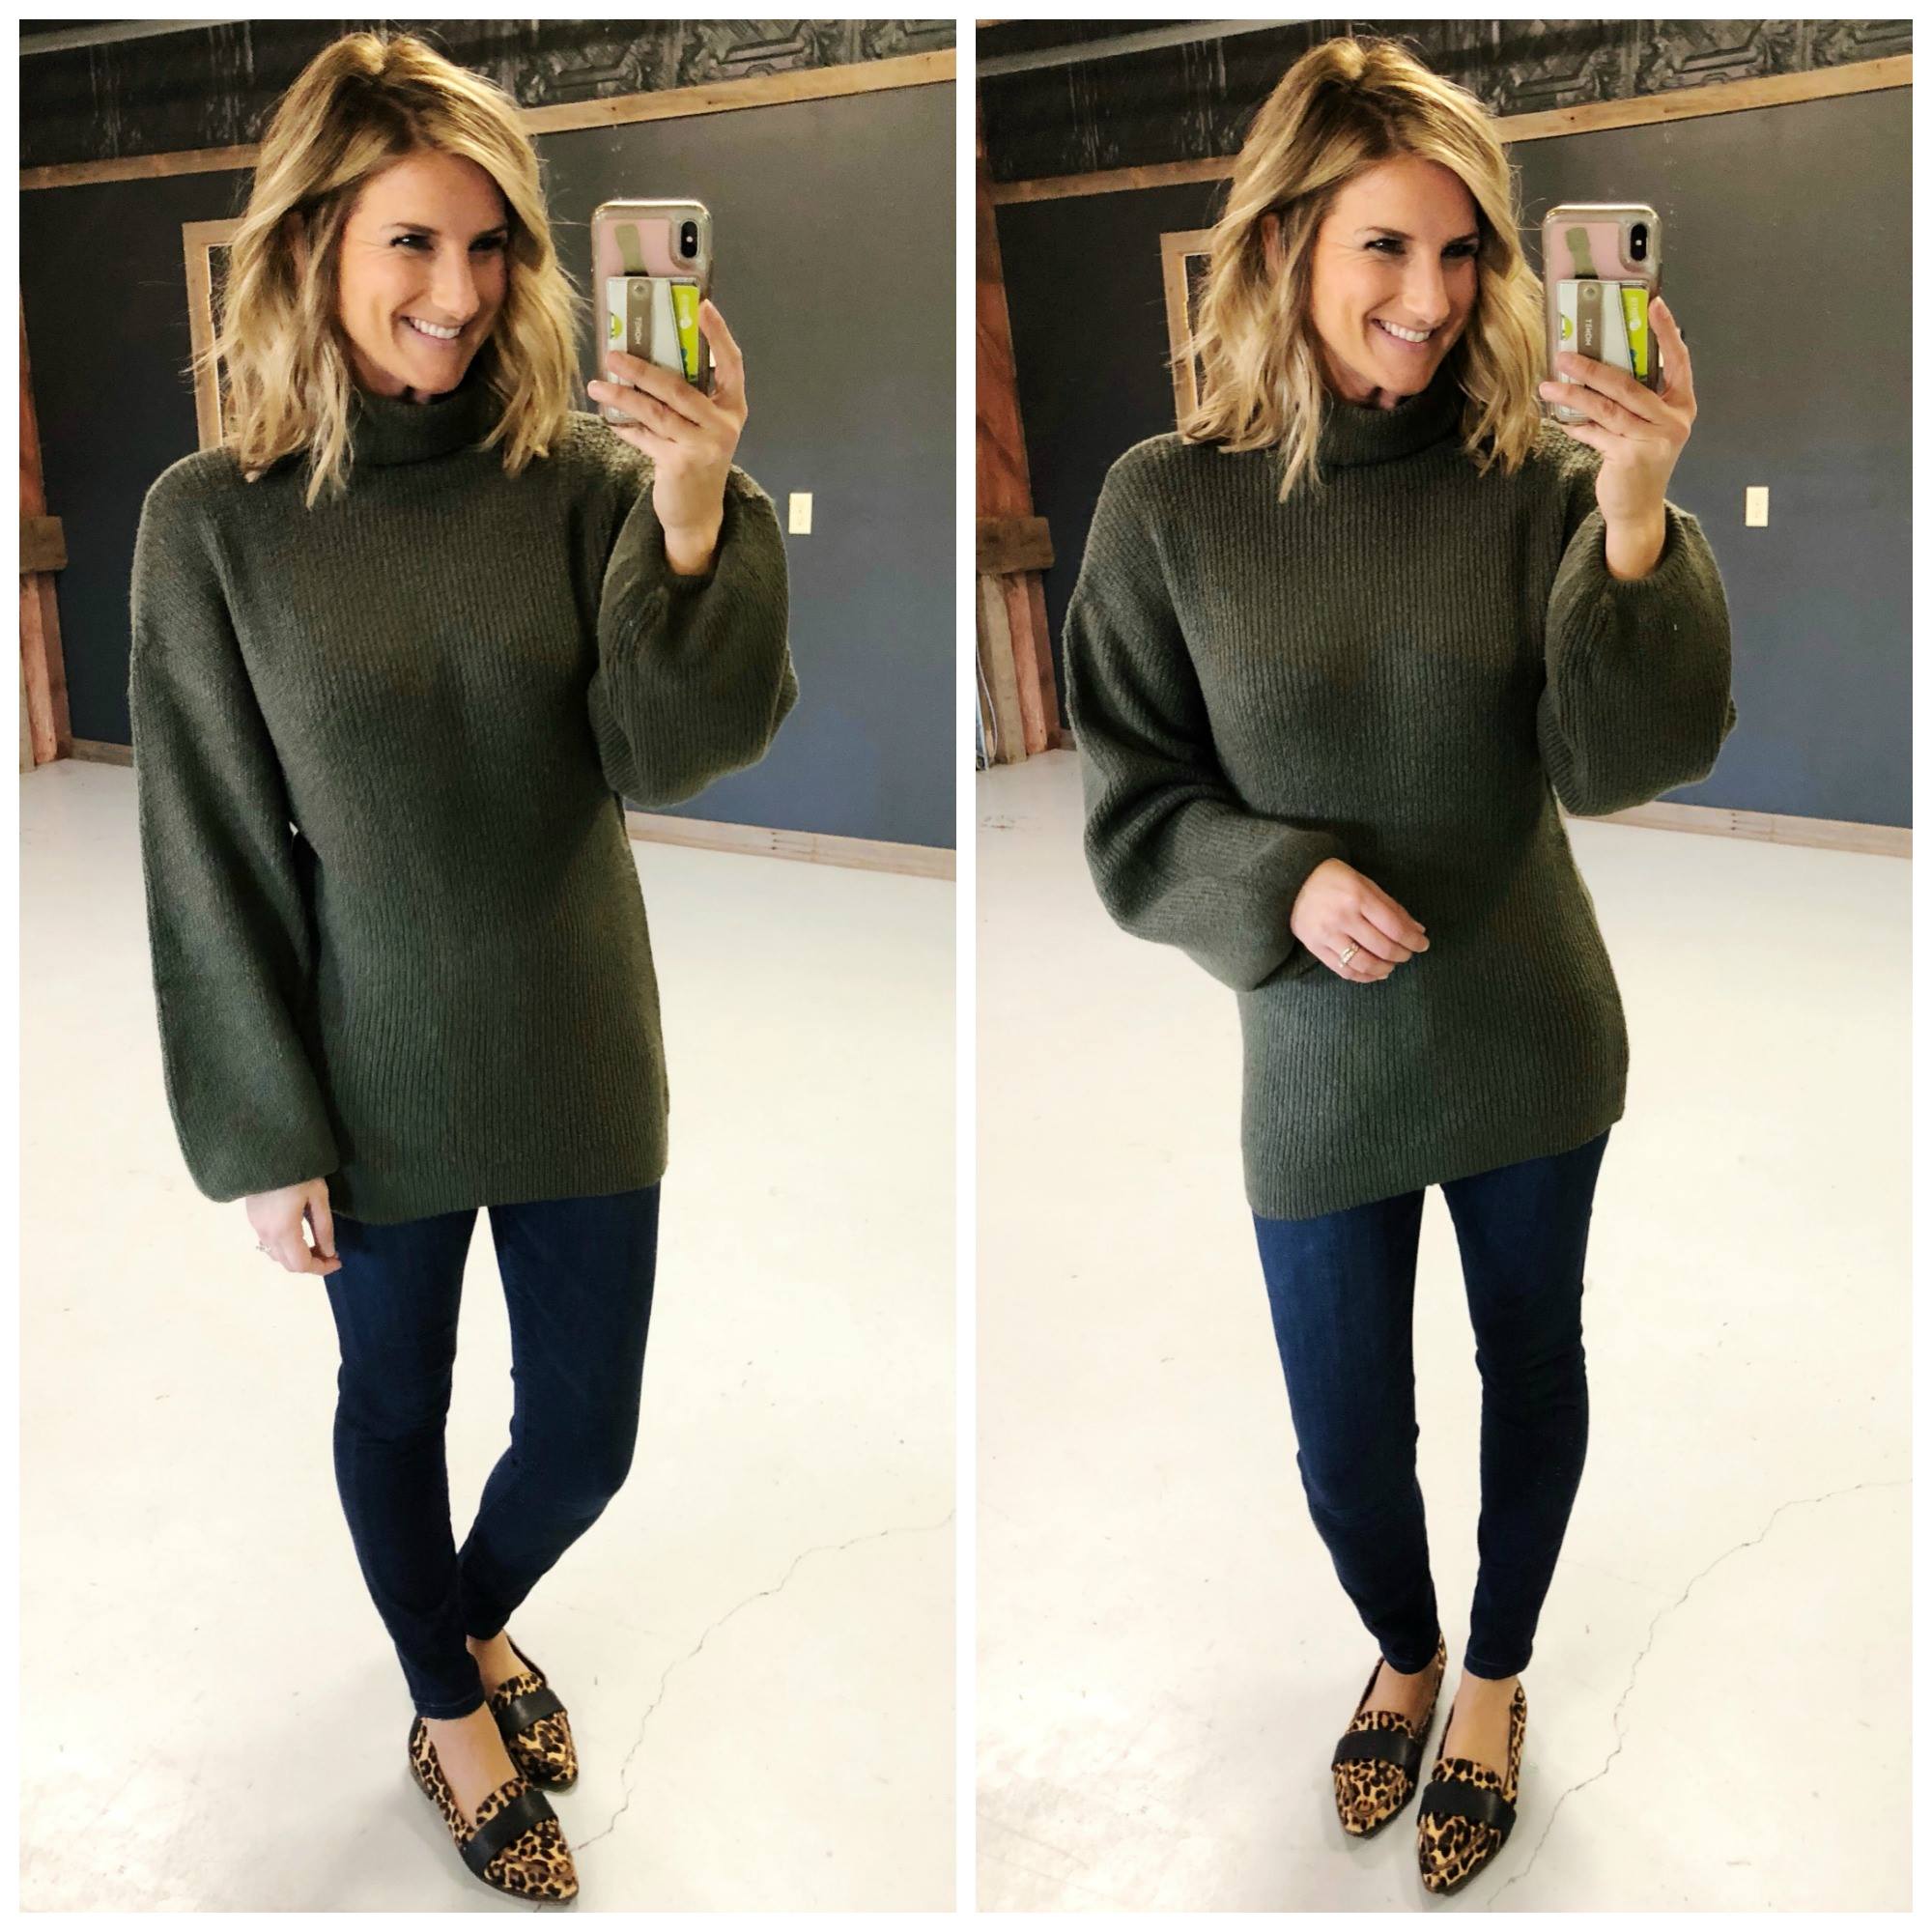 Tunic Sweater // Turtleneck Sweater // Fall Fashion // Leopard Flats // Casual Outfit // Date Night Outfit // Funnel Neck Sweater